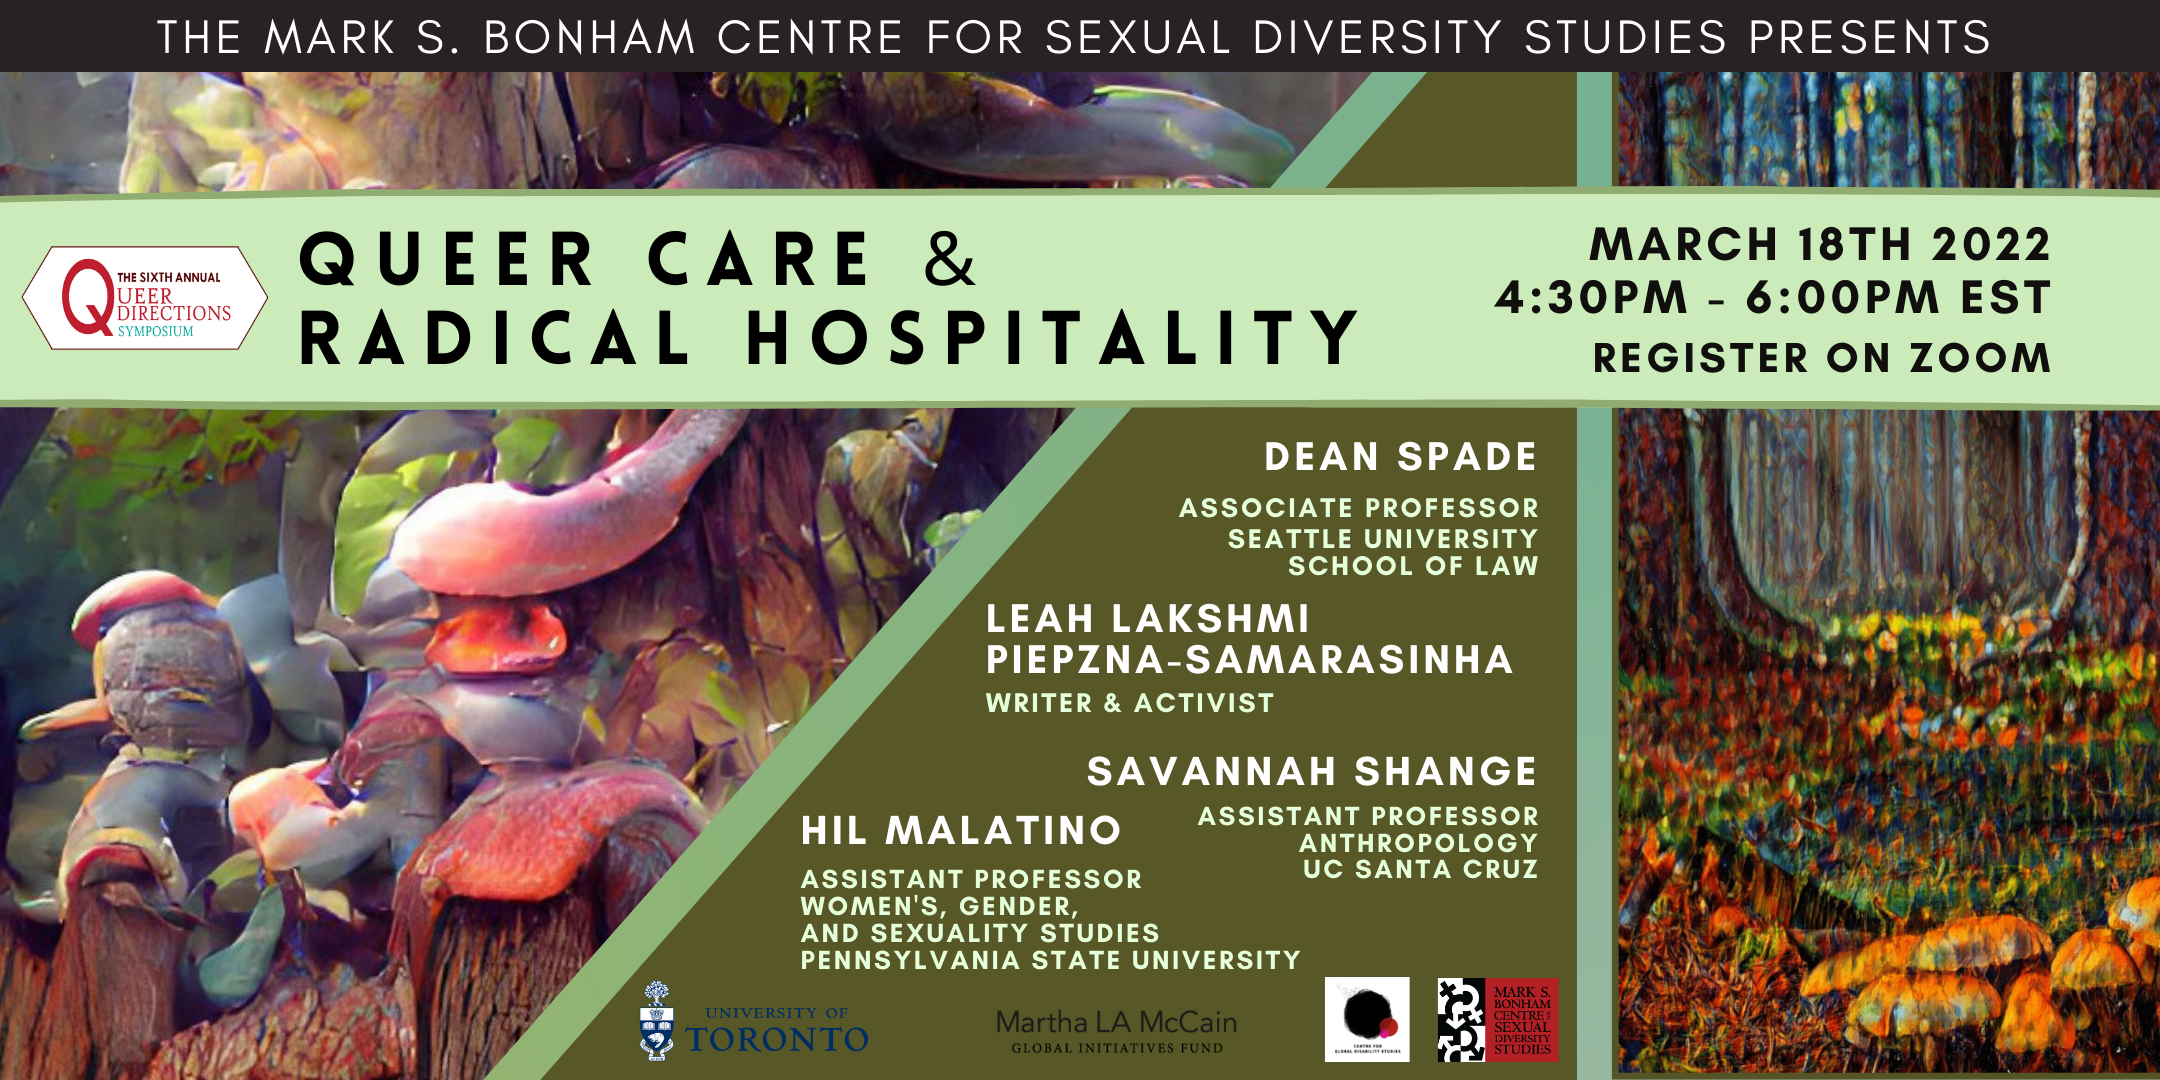 Banner featuring stylized images of symbiotic fungi with tree trunks, including the event title, details, and guest names detailed in event post. Logos for the University of Toronto, Bonham Centre, Martha LA McCain Global Initiatives Fund, and Centre for Global Disability Studies at bottom.